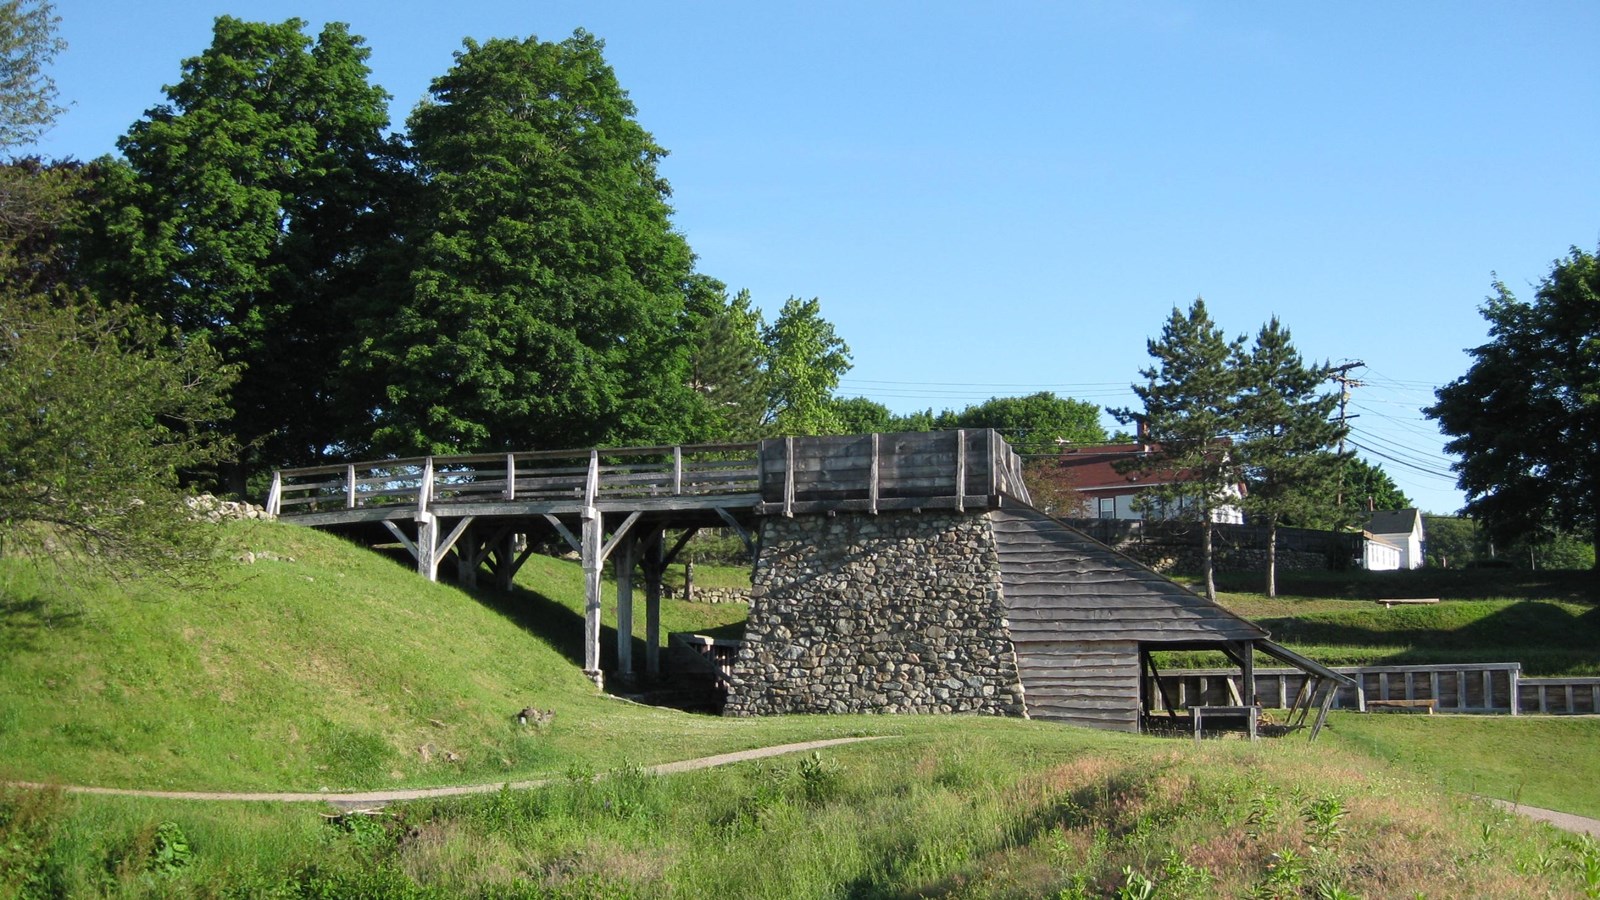 A stone furnace topped by a wooden bridge and open-air shed on bottom